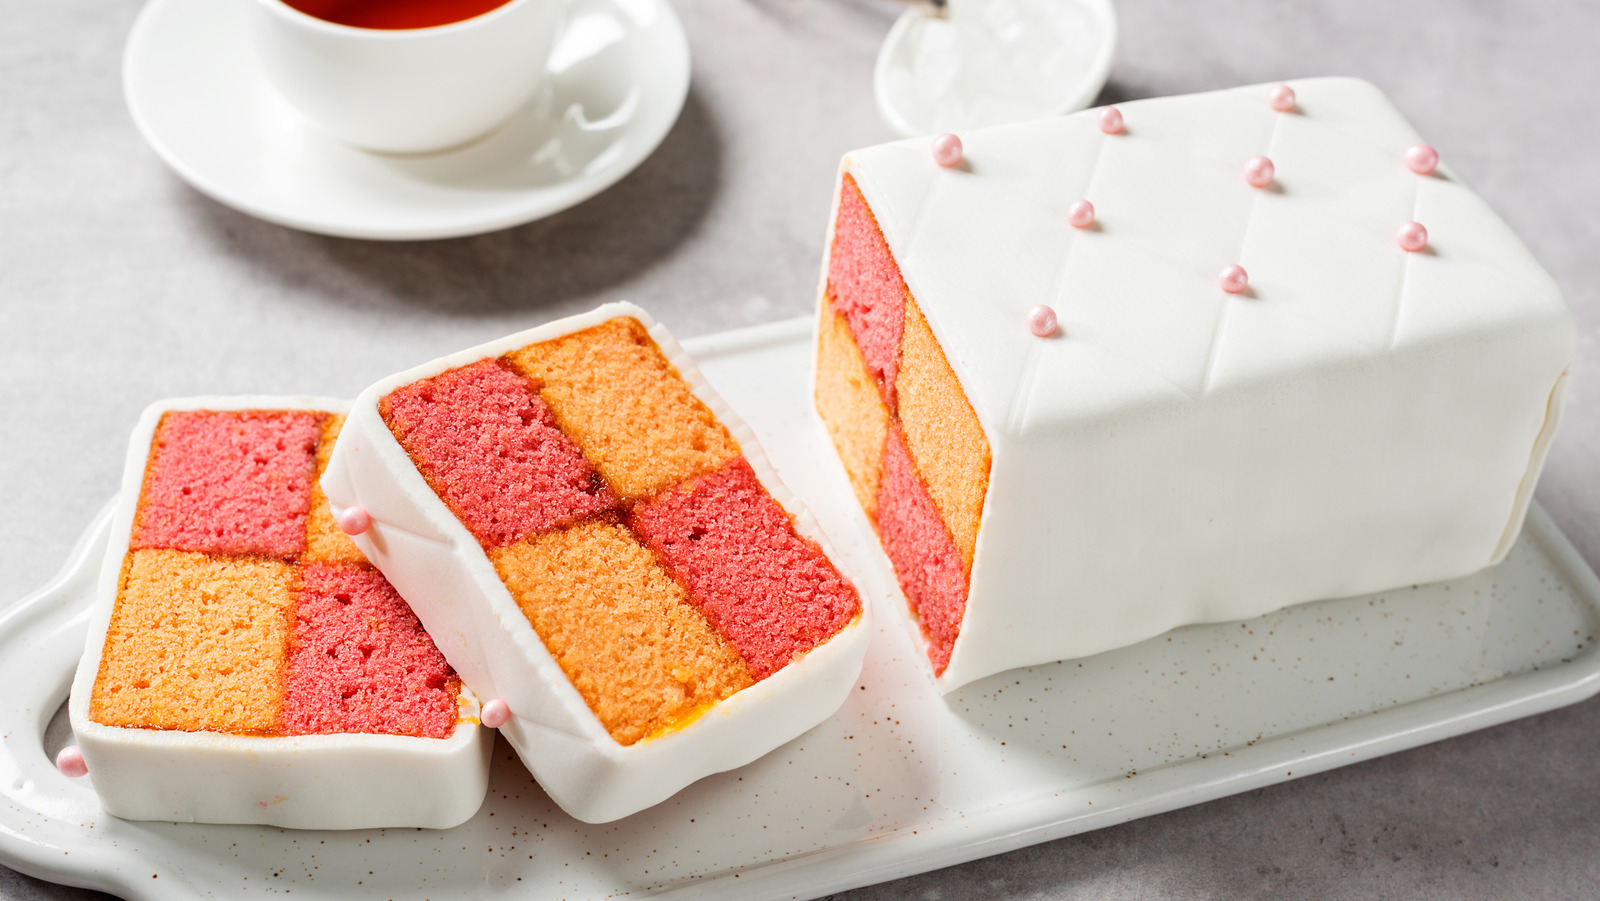 Battenberg cake from Oats in the North, Wheat from the South: The history  of British Baking, savoury and sweet by Regula Ysewijn